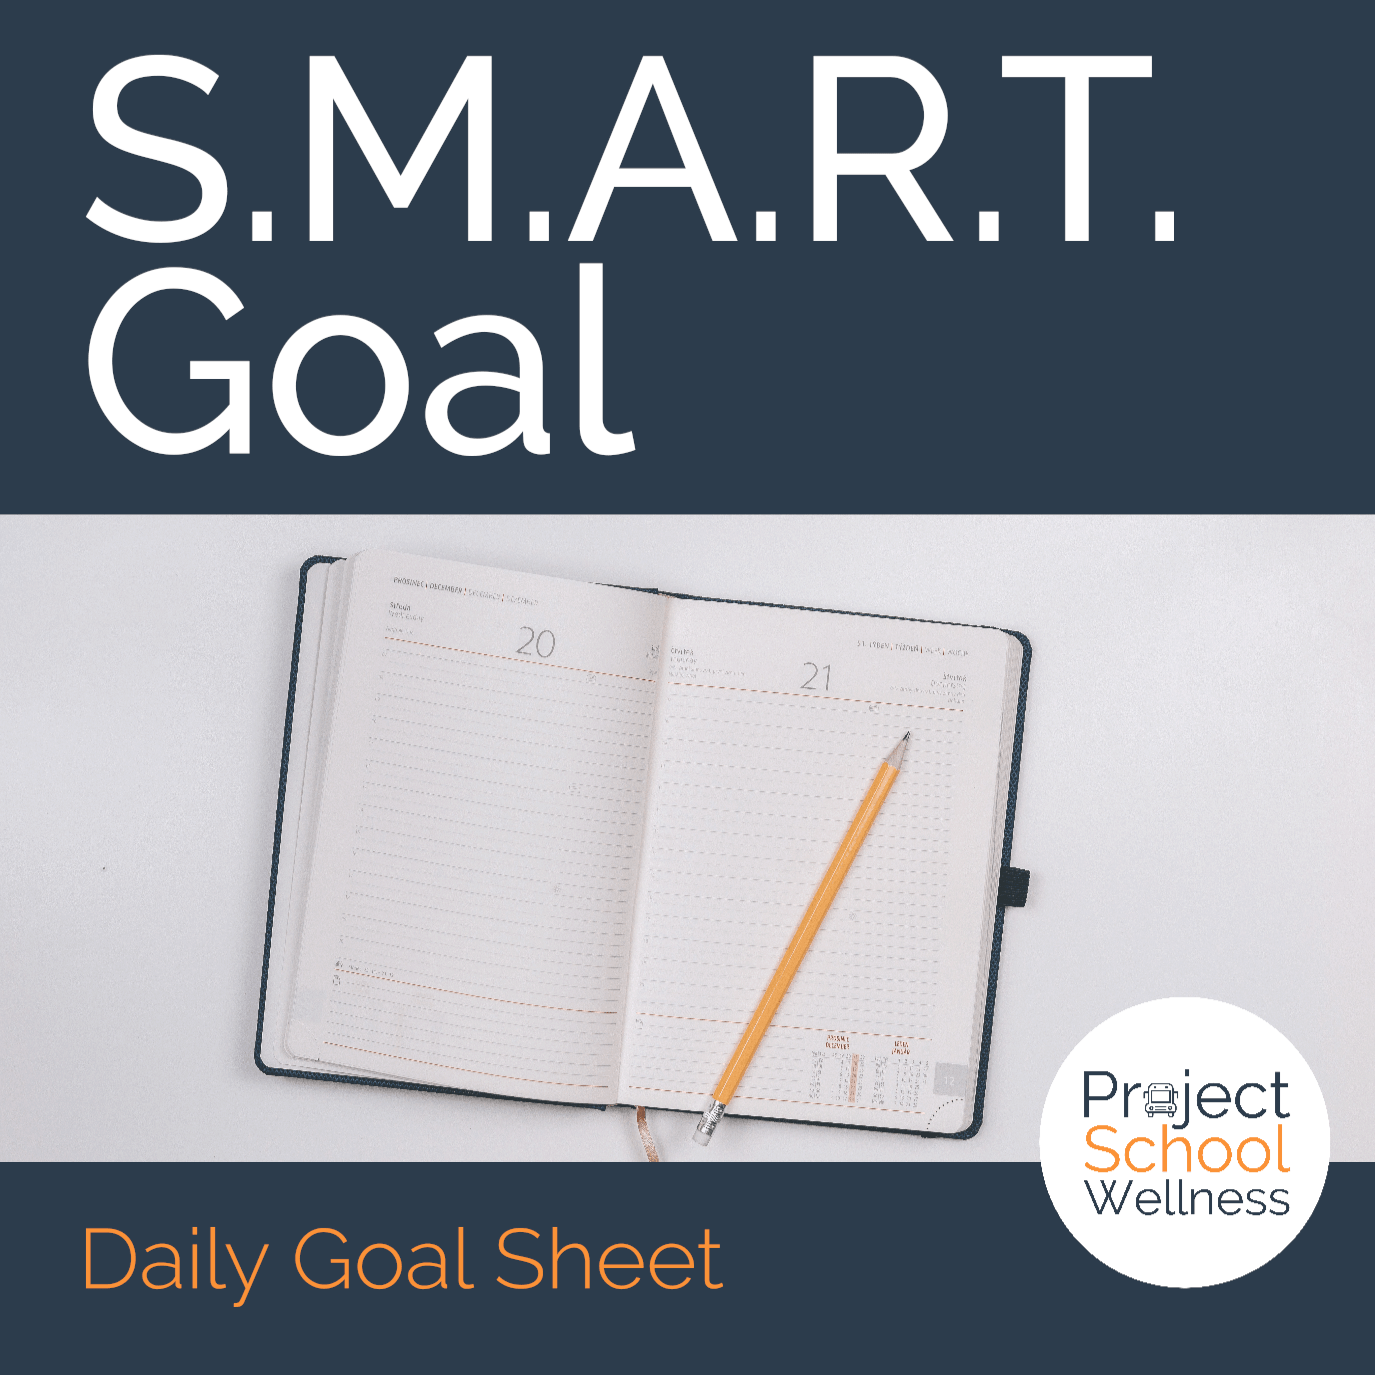 PSW Store - Daily Goal Sheet